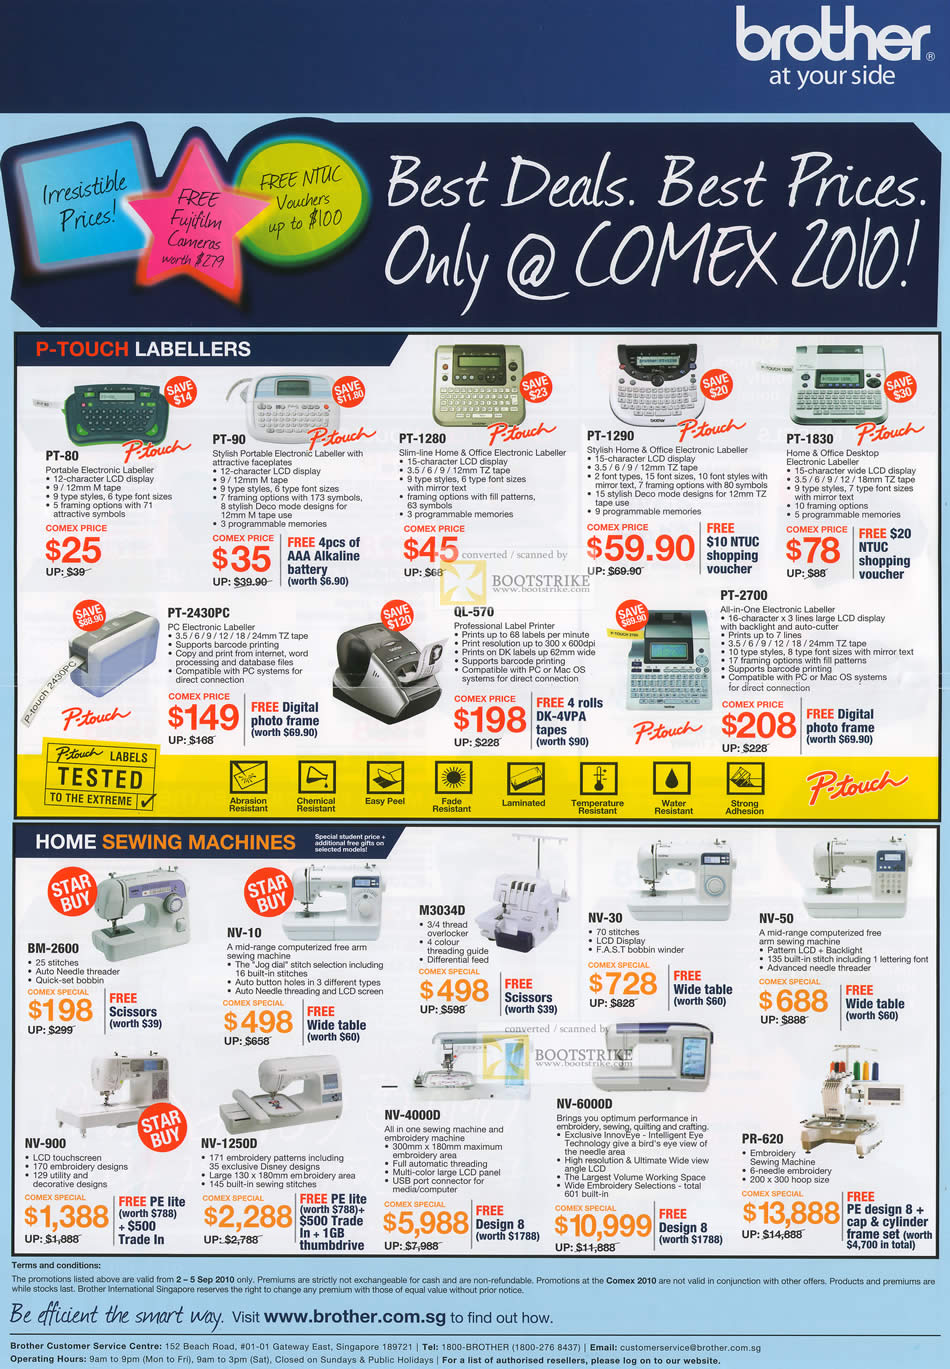 Comex 2010 price list image brochure of Brother P Touch Labellers PT 80 90 1280 1290 1830 Home Sewing Machines BM NV 10 NV 6000D PR 620